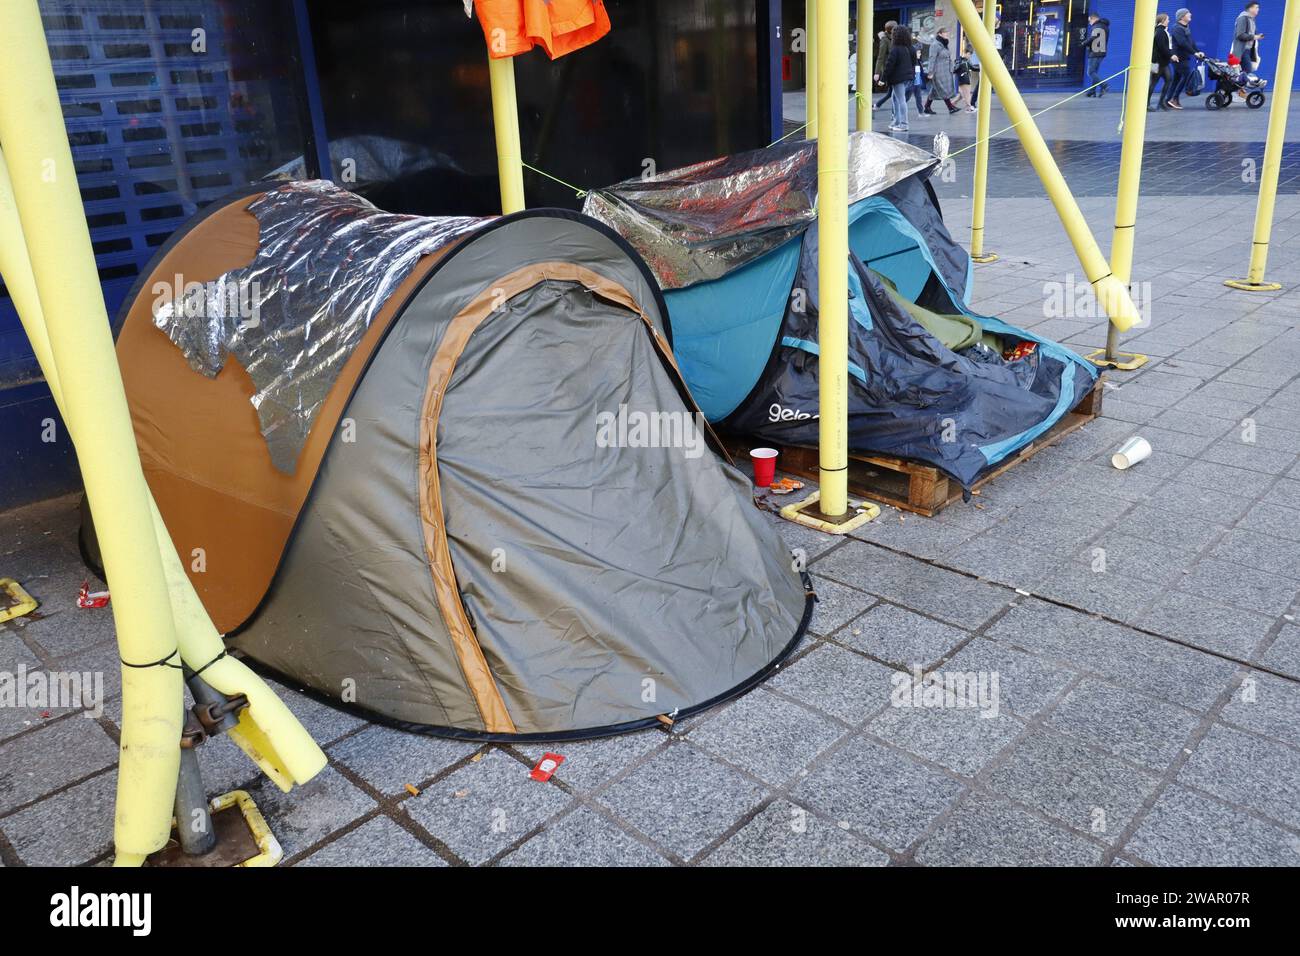 shoppers walk past tents put up by homeless people outside shops in the church street area of Liverpool city centre, merseyside, england, uk Stock Photo